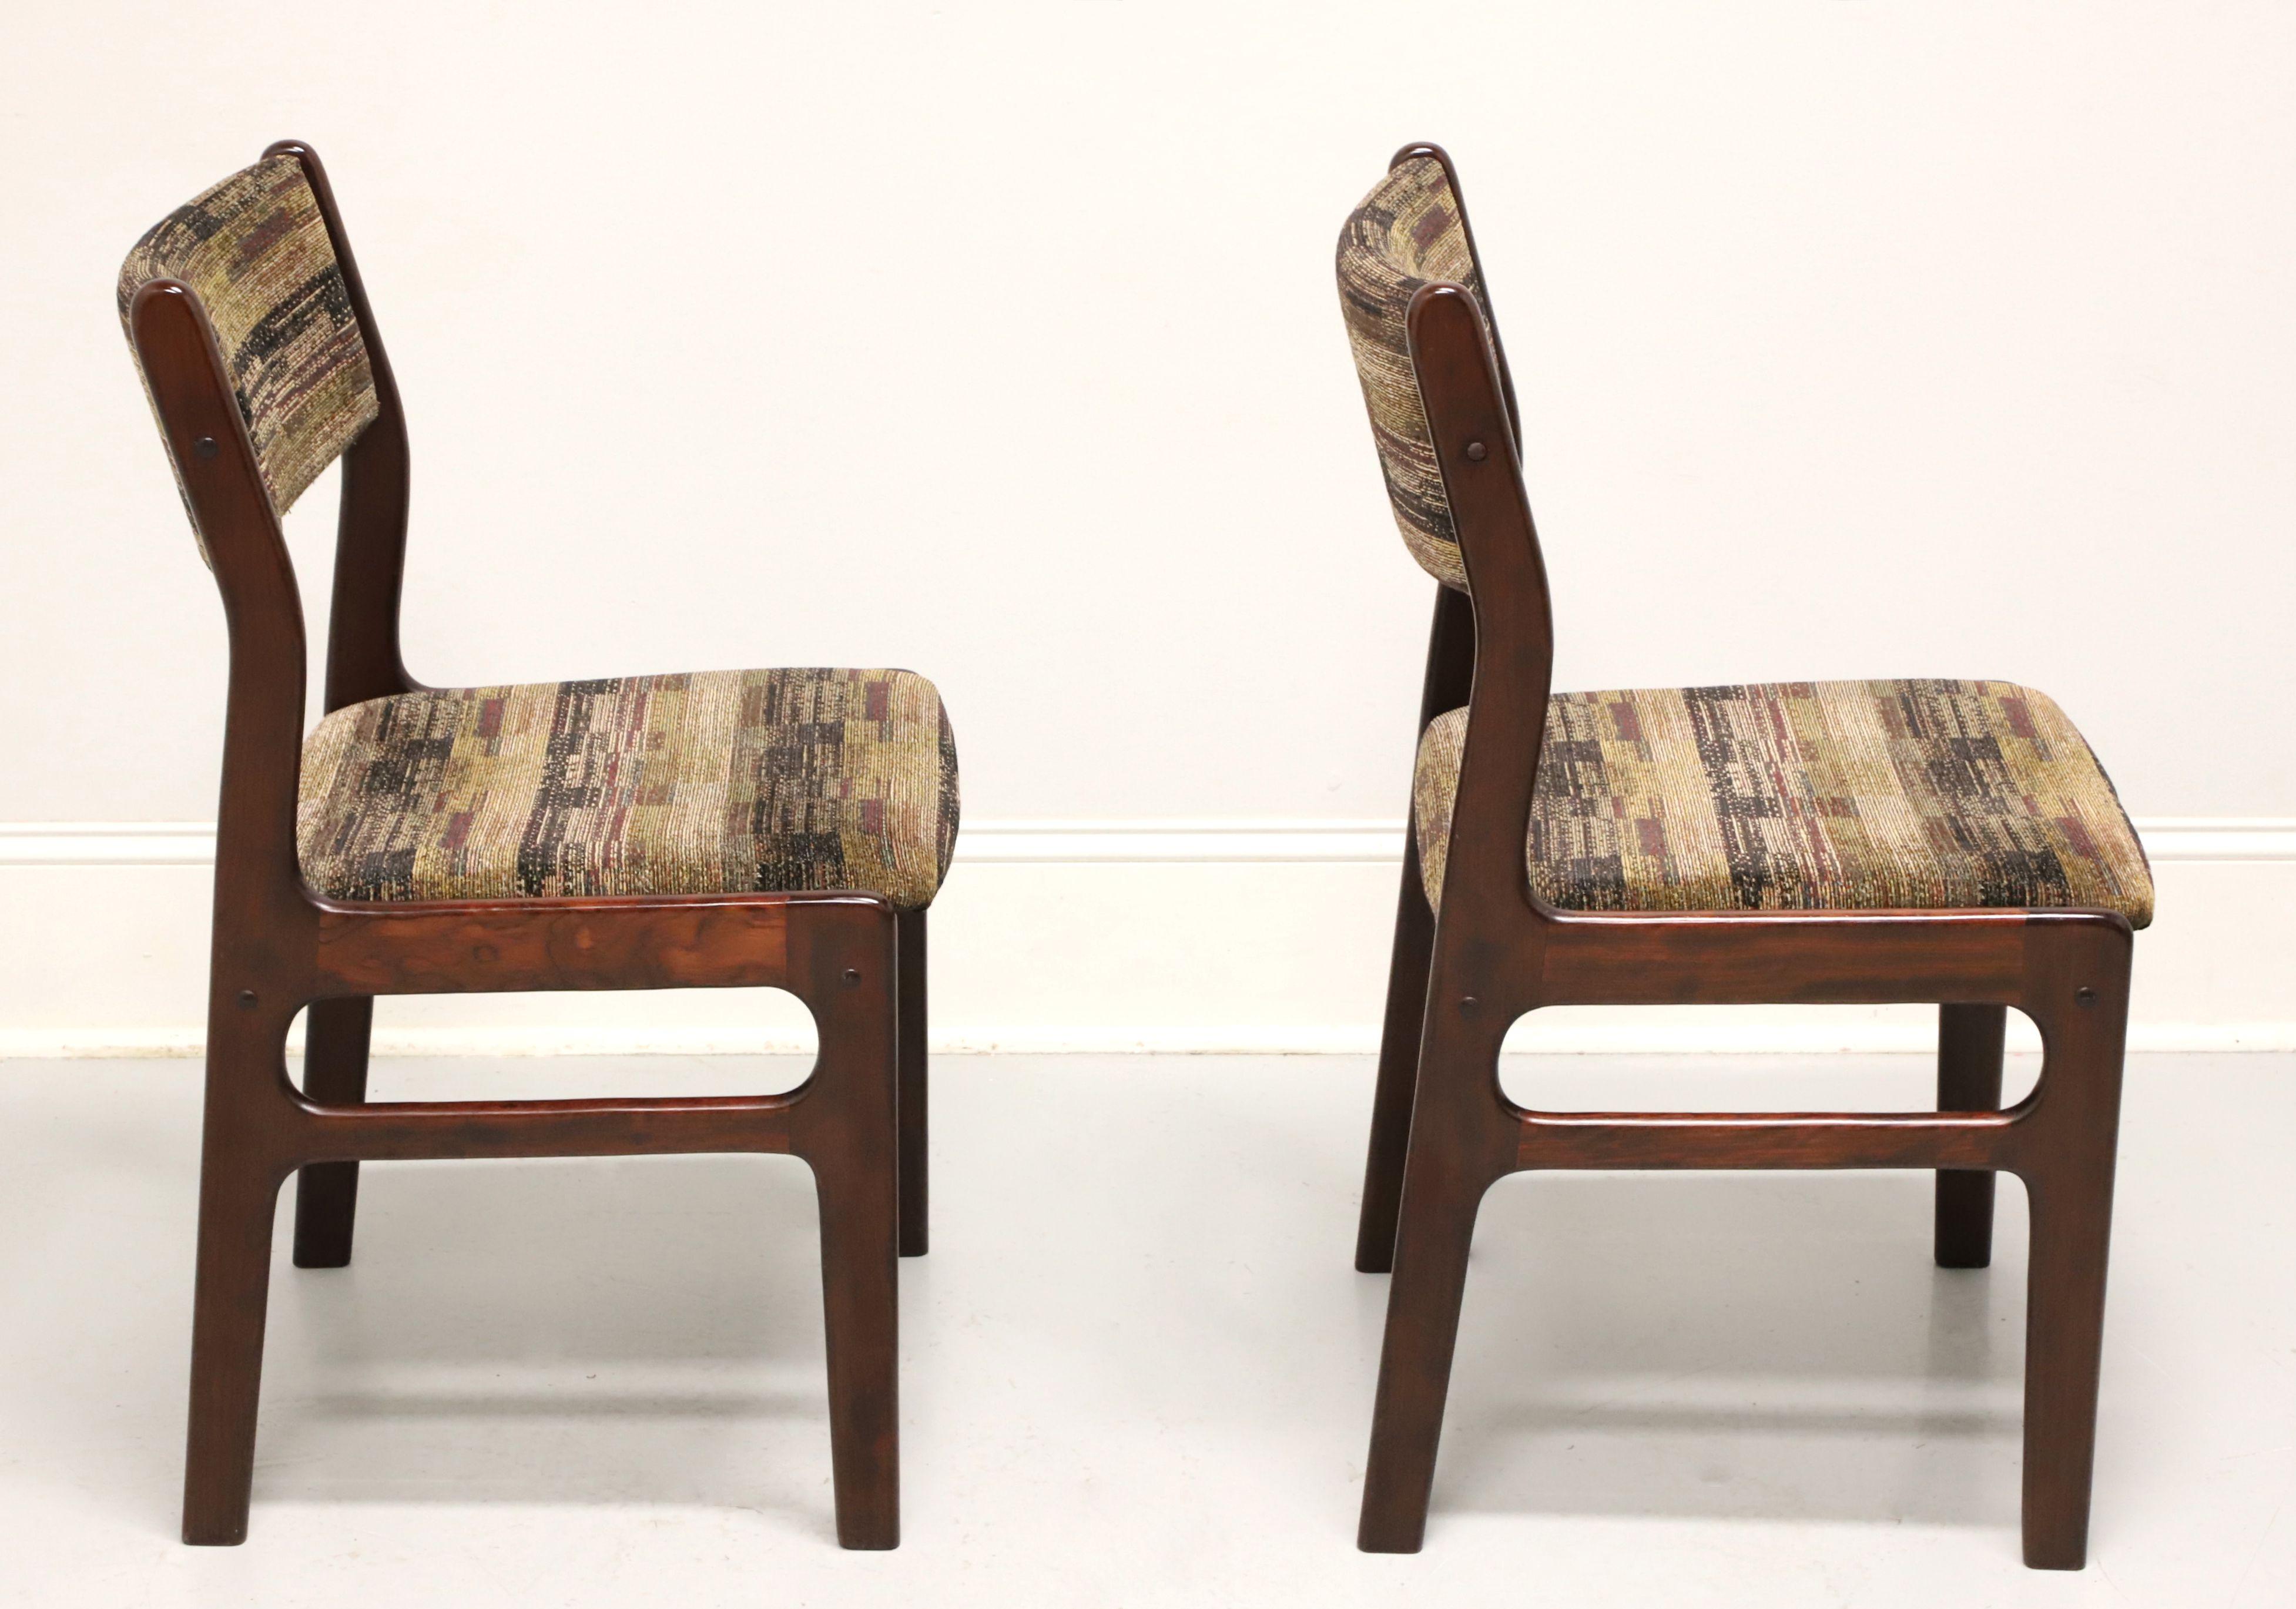 Danois DYRLUND Mid 20th Century Rosewood Danish Modern Dining Side Chairs - Pair A en vente